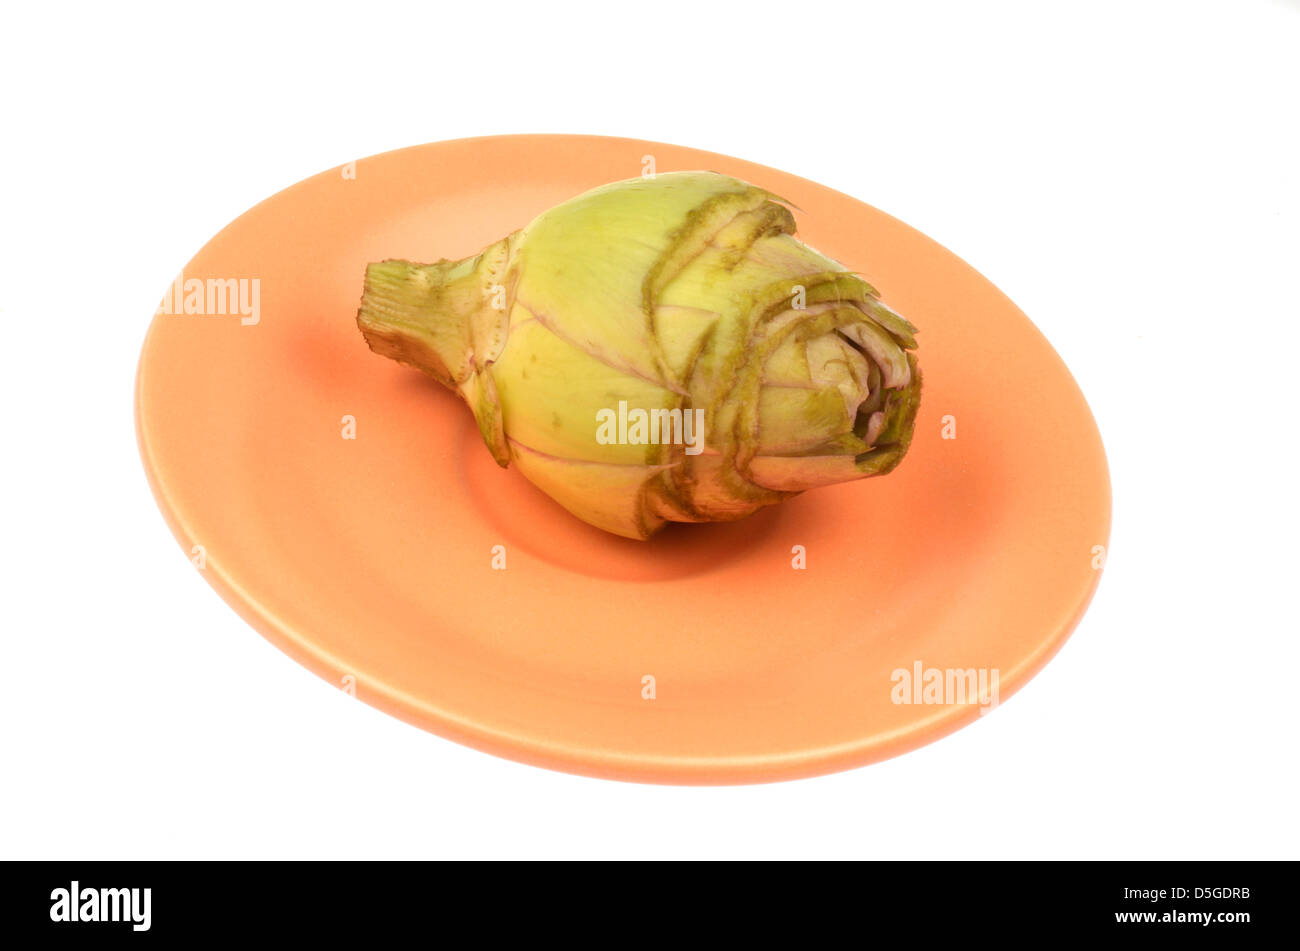 artichoke peeled and cleaned on saucer Stock Photo